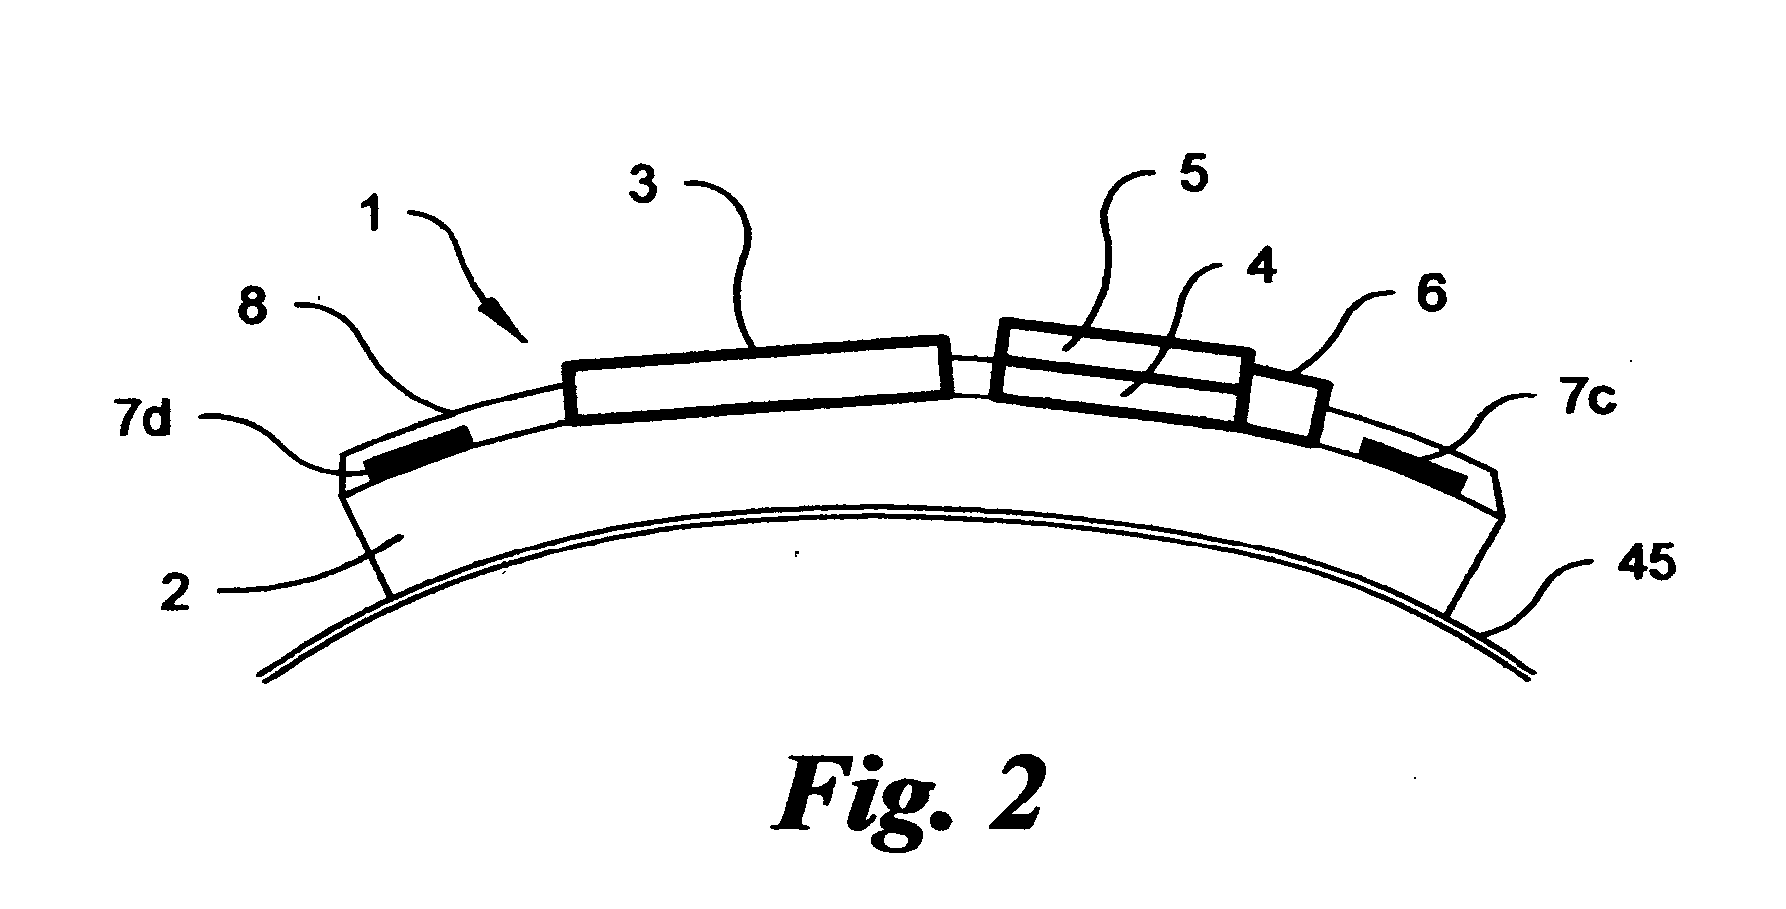 Flexible actuator with integral control circuitry and sensors